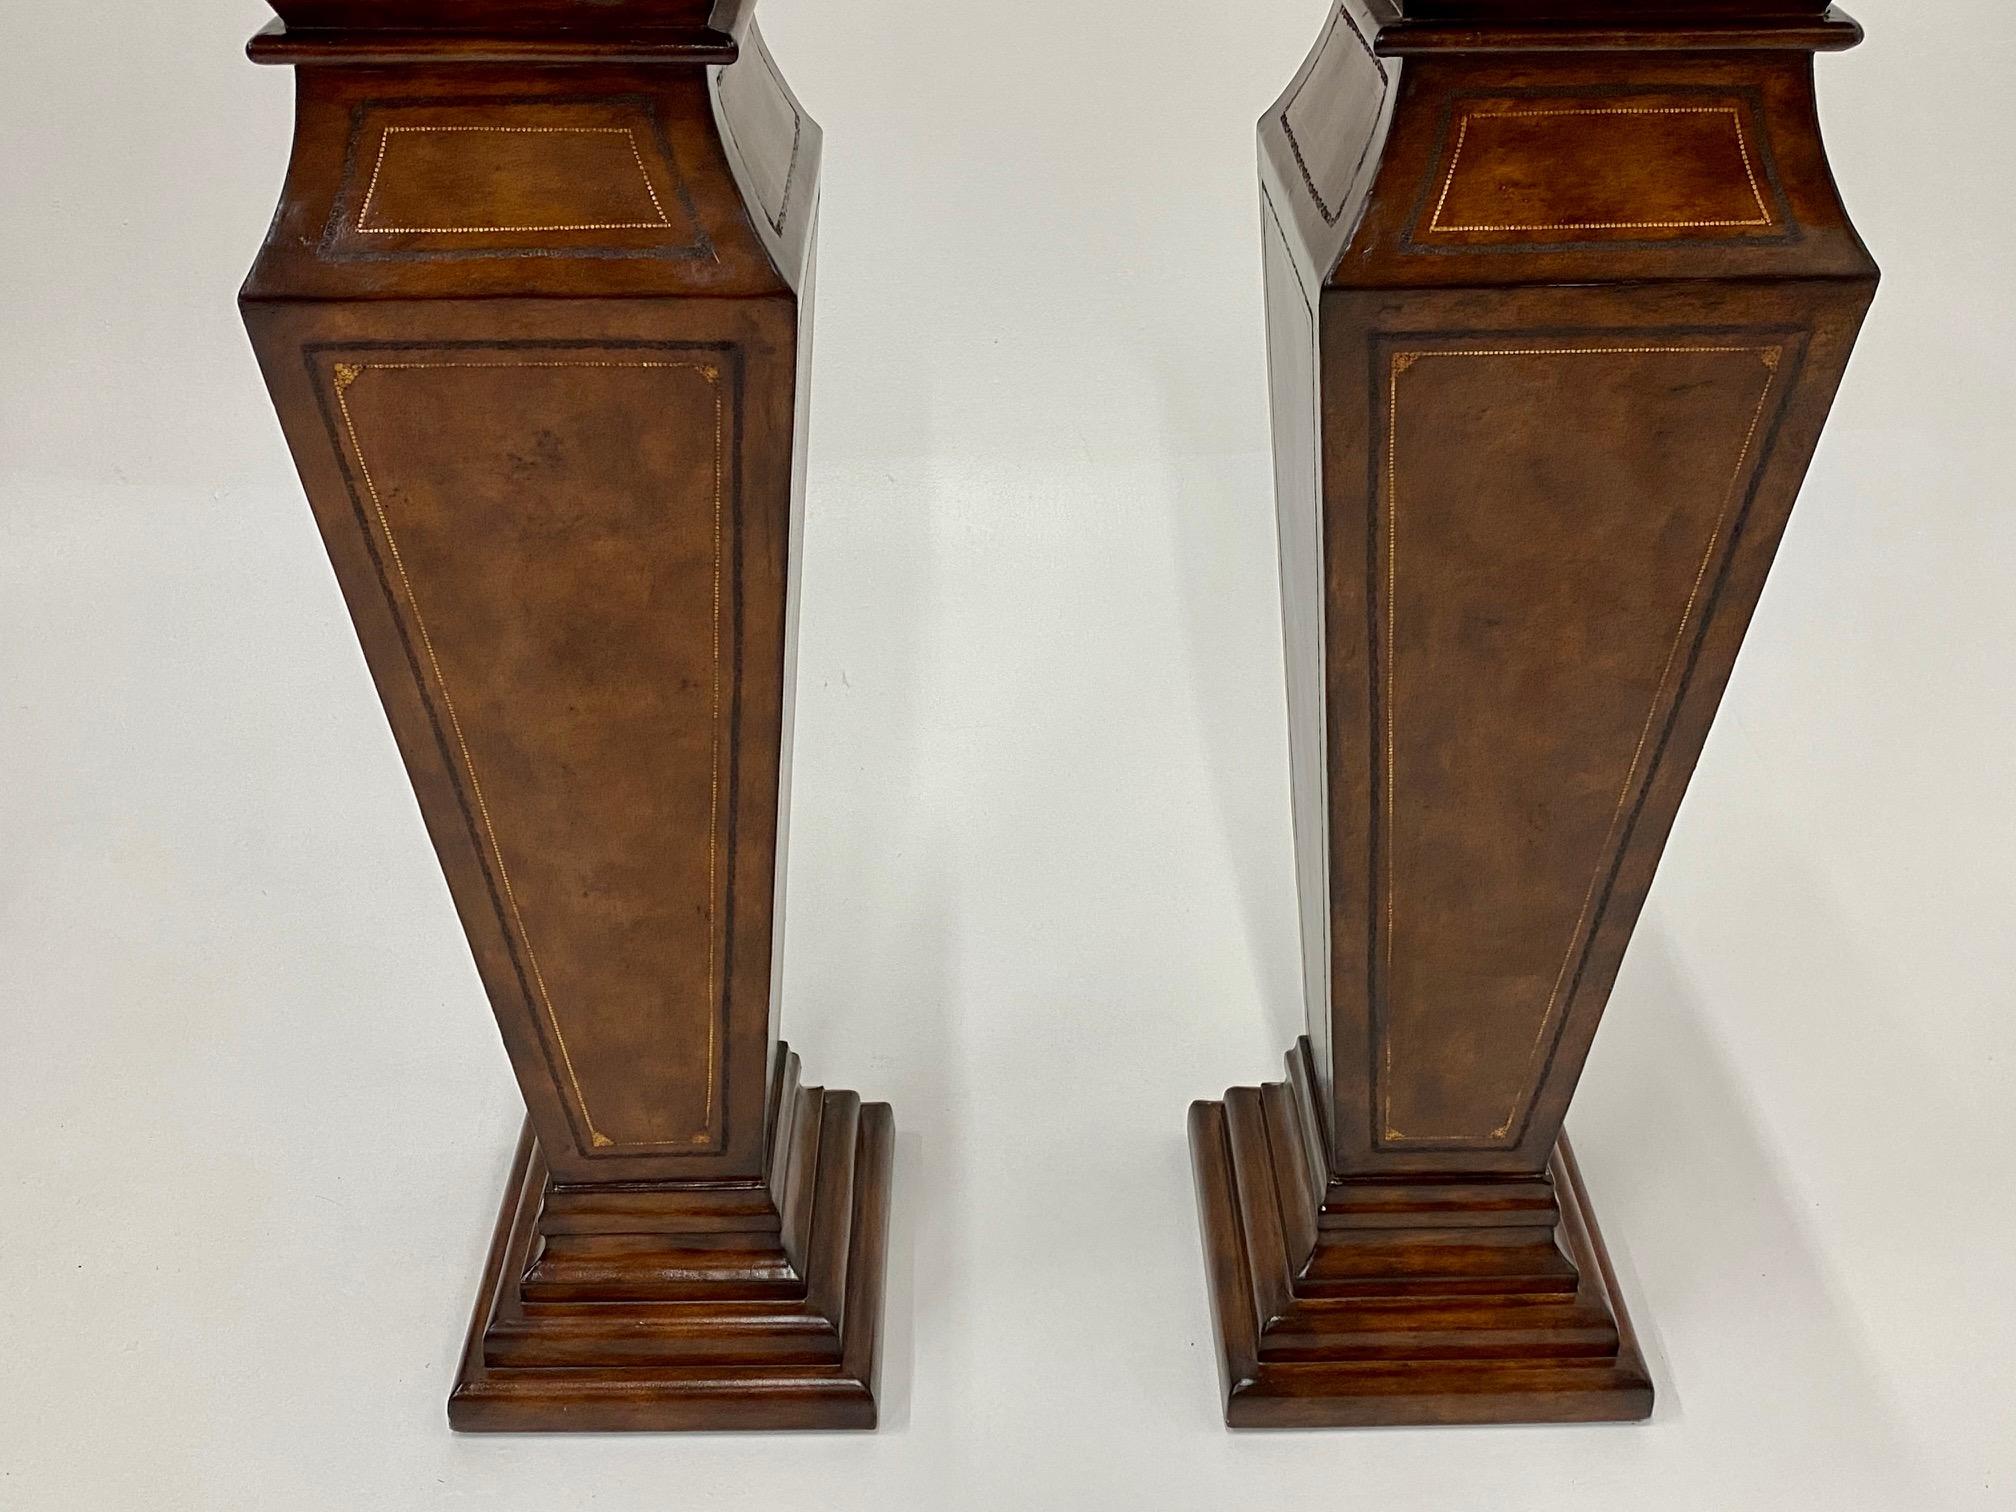 Philippine Stately Pair of Leather Wrapped Pedestals with Gold Embossed Decoration